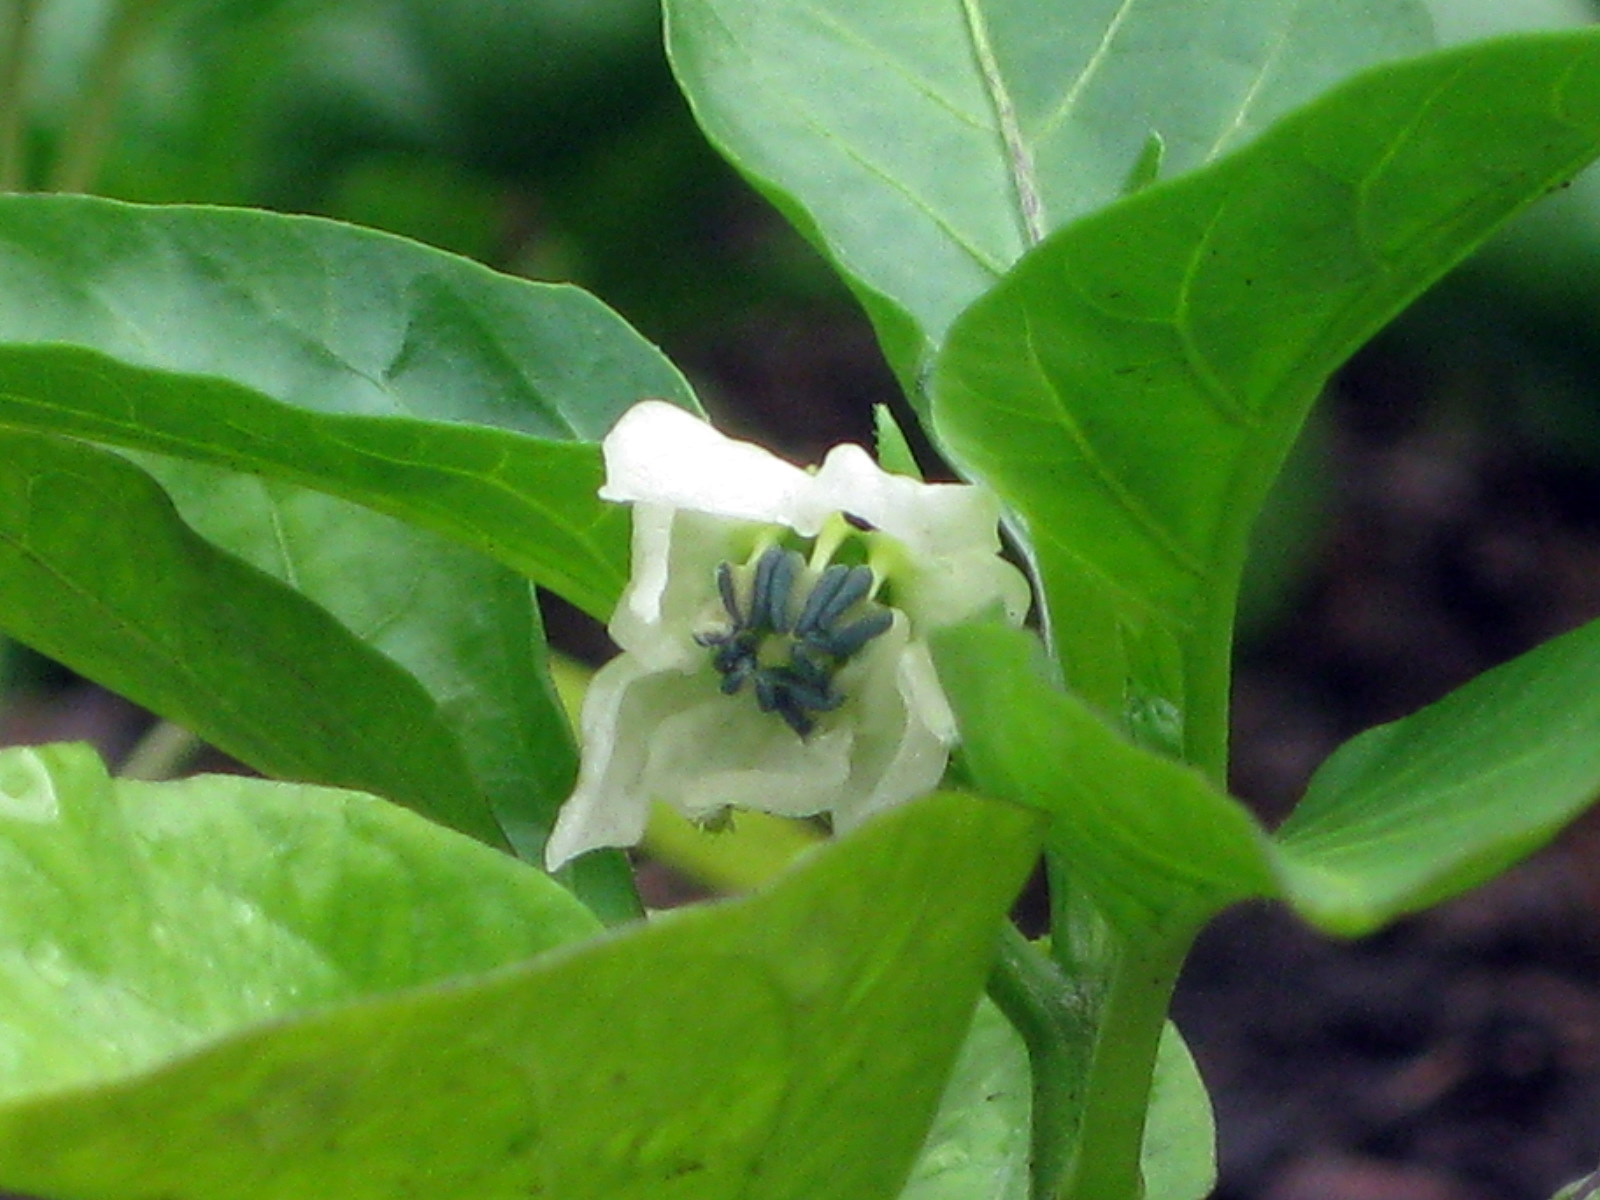 Coaxing Pepper Plants to Bloom